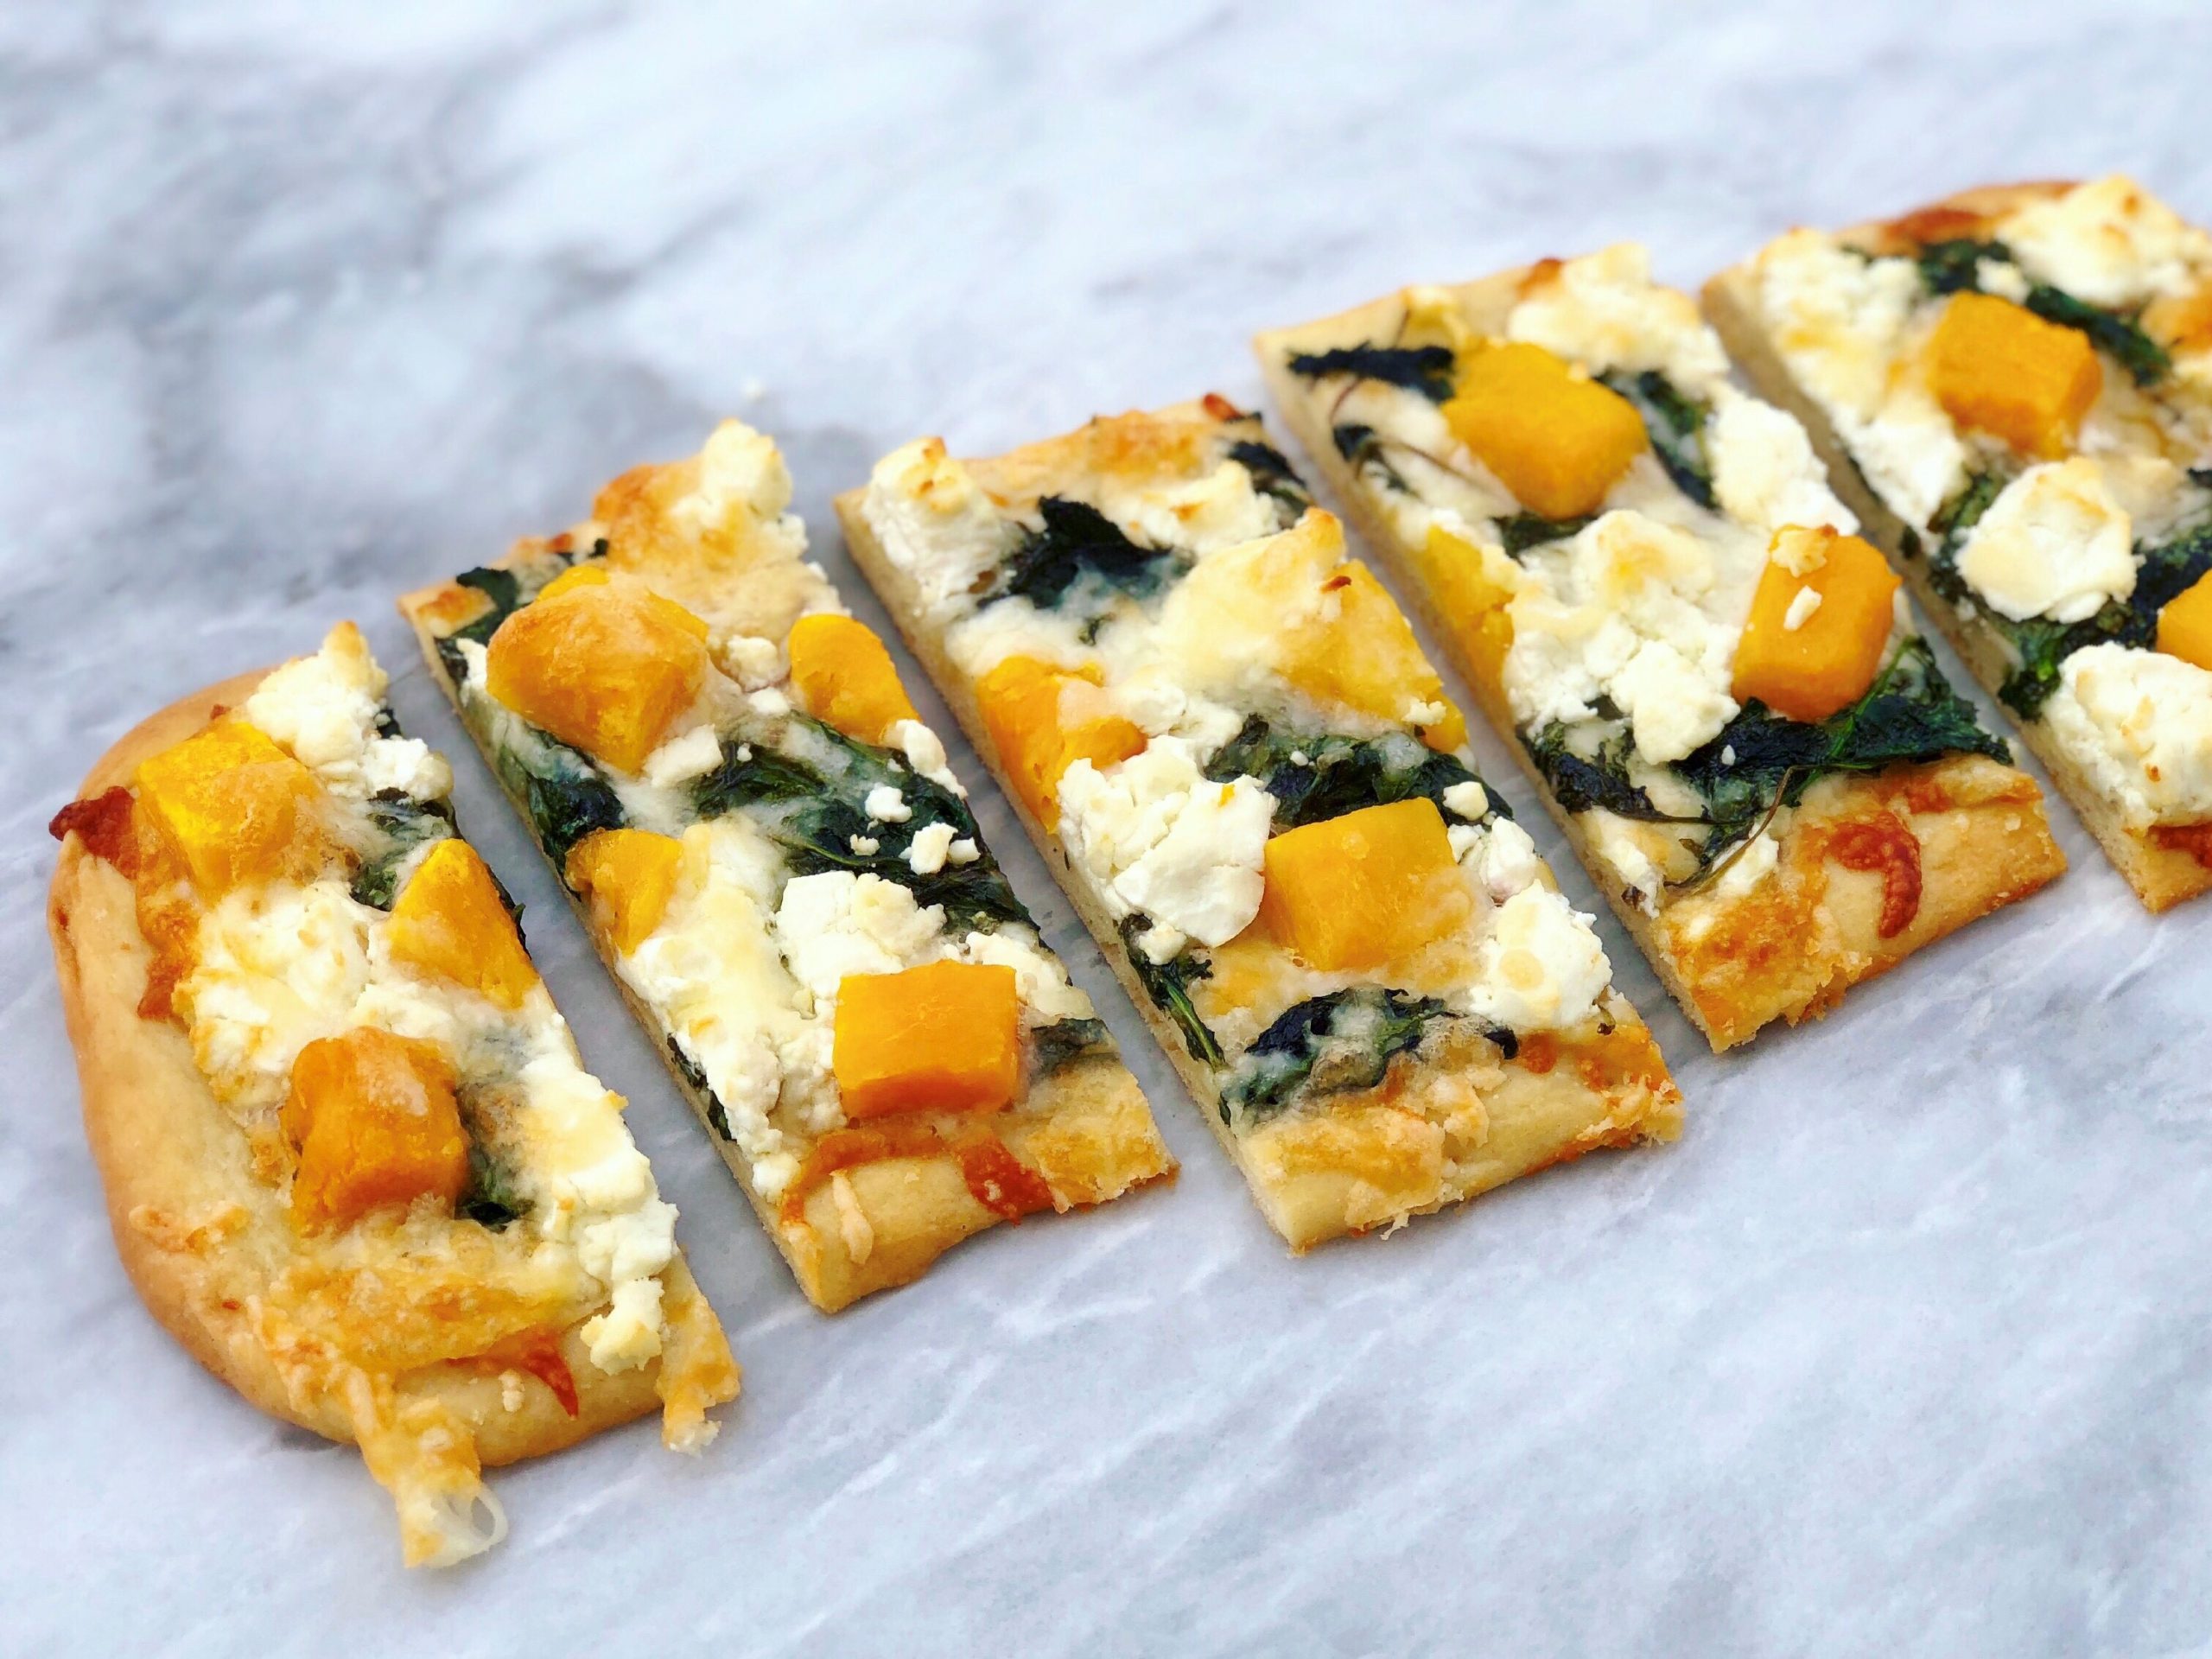 Dish of Butternut Squash, Kale, and Goat Cheese Flatbread